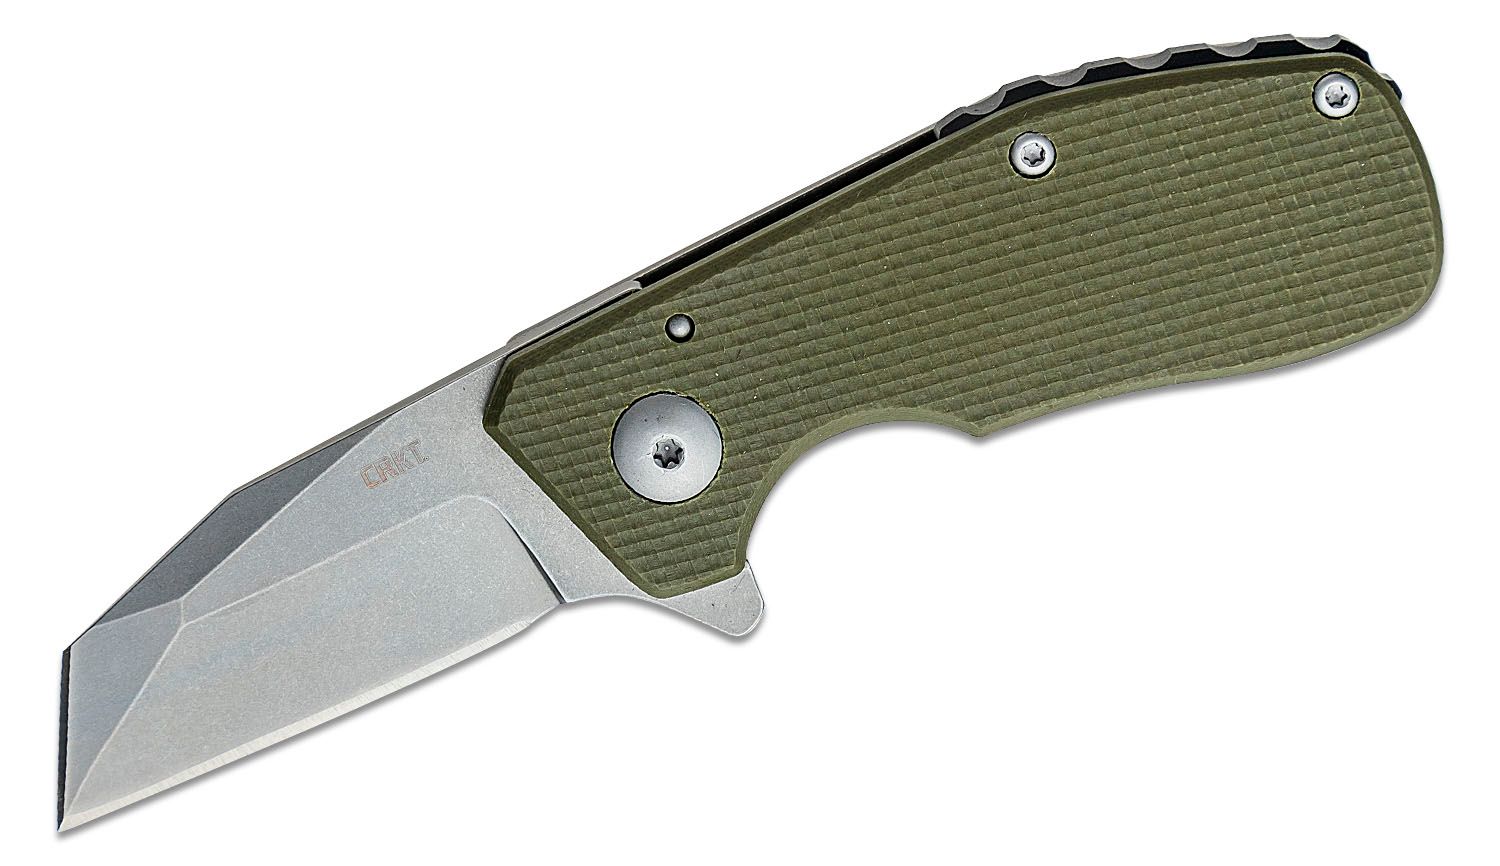 Columbia River CRKT 4021ODS Jon Graham Razelcliffe Flipper Knife 2.09  Stonewashed Wharncliffe Chisel Blade, OD Green G10 and Stonewashed  Stainless Steel Handles - KnifeCenter